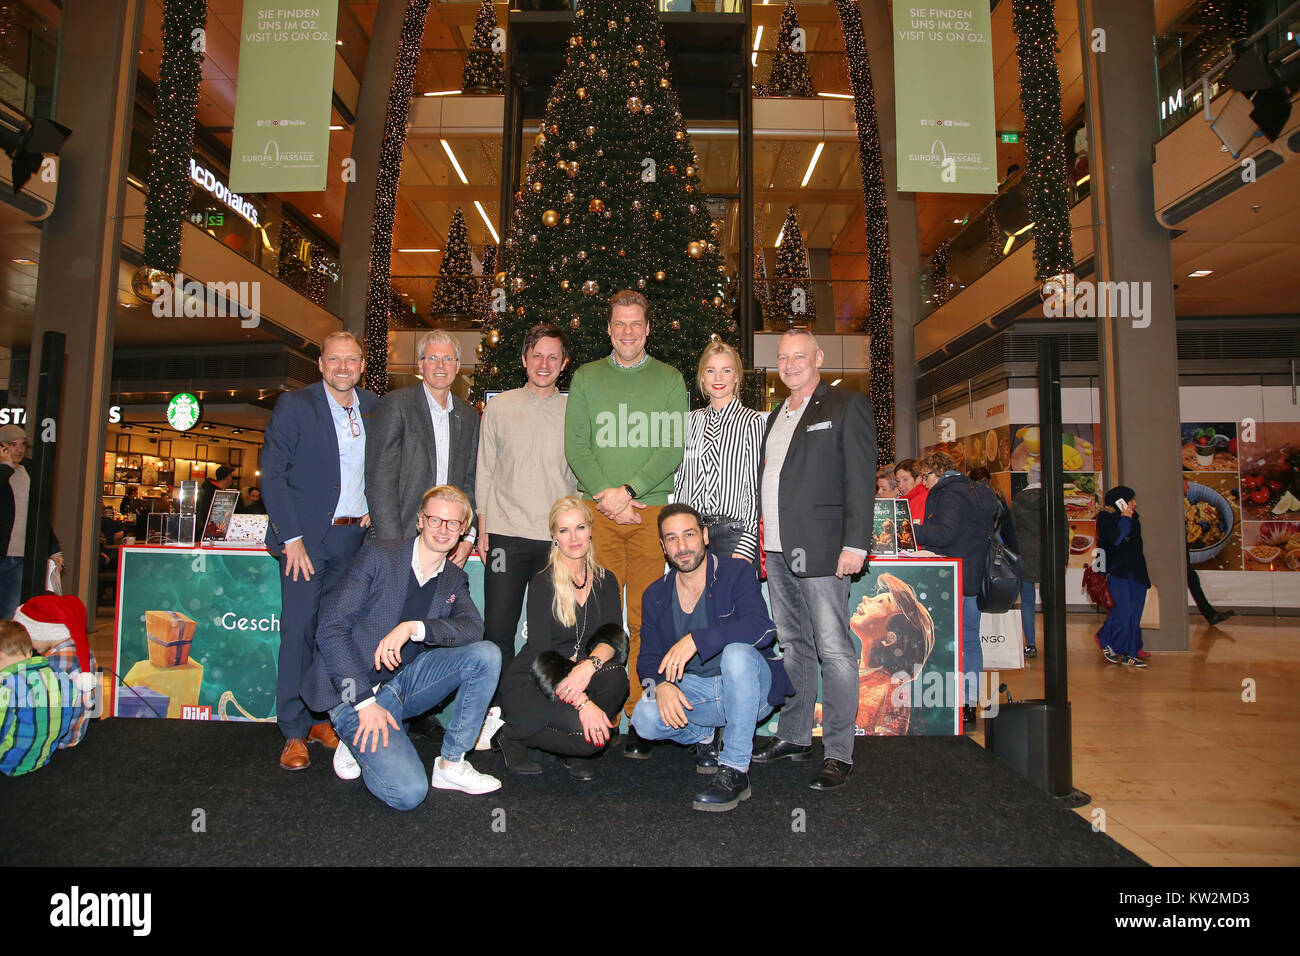 Charity gift wrapping with stars for 'Ein Herz fuer Kinder' at the shopping mall Europa Passage in Hamburg  Featuring: Kim Sarah Brandts, Anna Heesch, Tim Koller, Harry Schulz, Volkan Baydar, Tetje Mierendorf und Gerhard Loewe (Manager) Where: Hamburg, Germany When: 27 Nov 2017 Credit: Becher/WENN.com Stock Photo